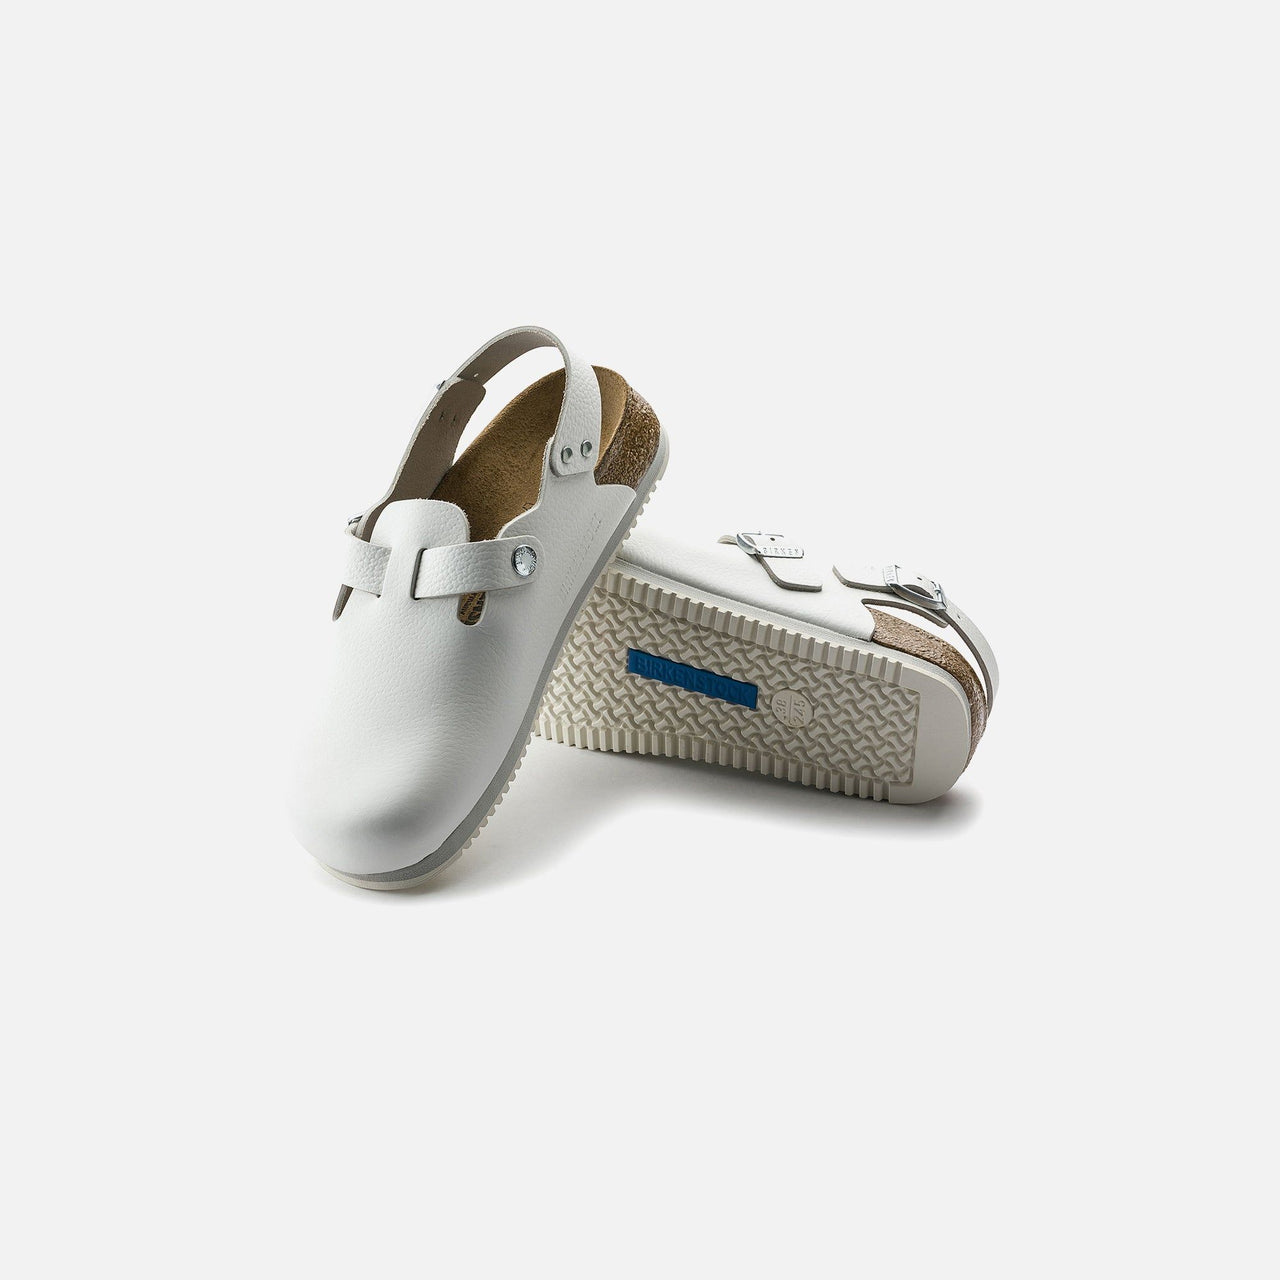 White leather Birkenstock clogs designed for maximum comfort and stability